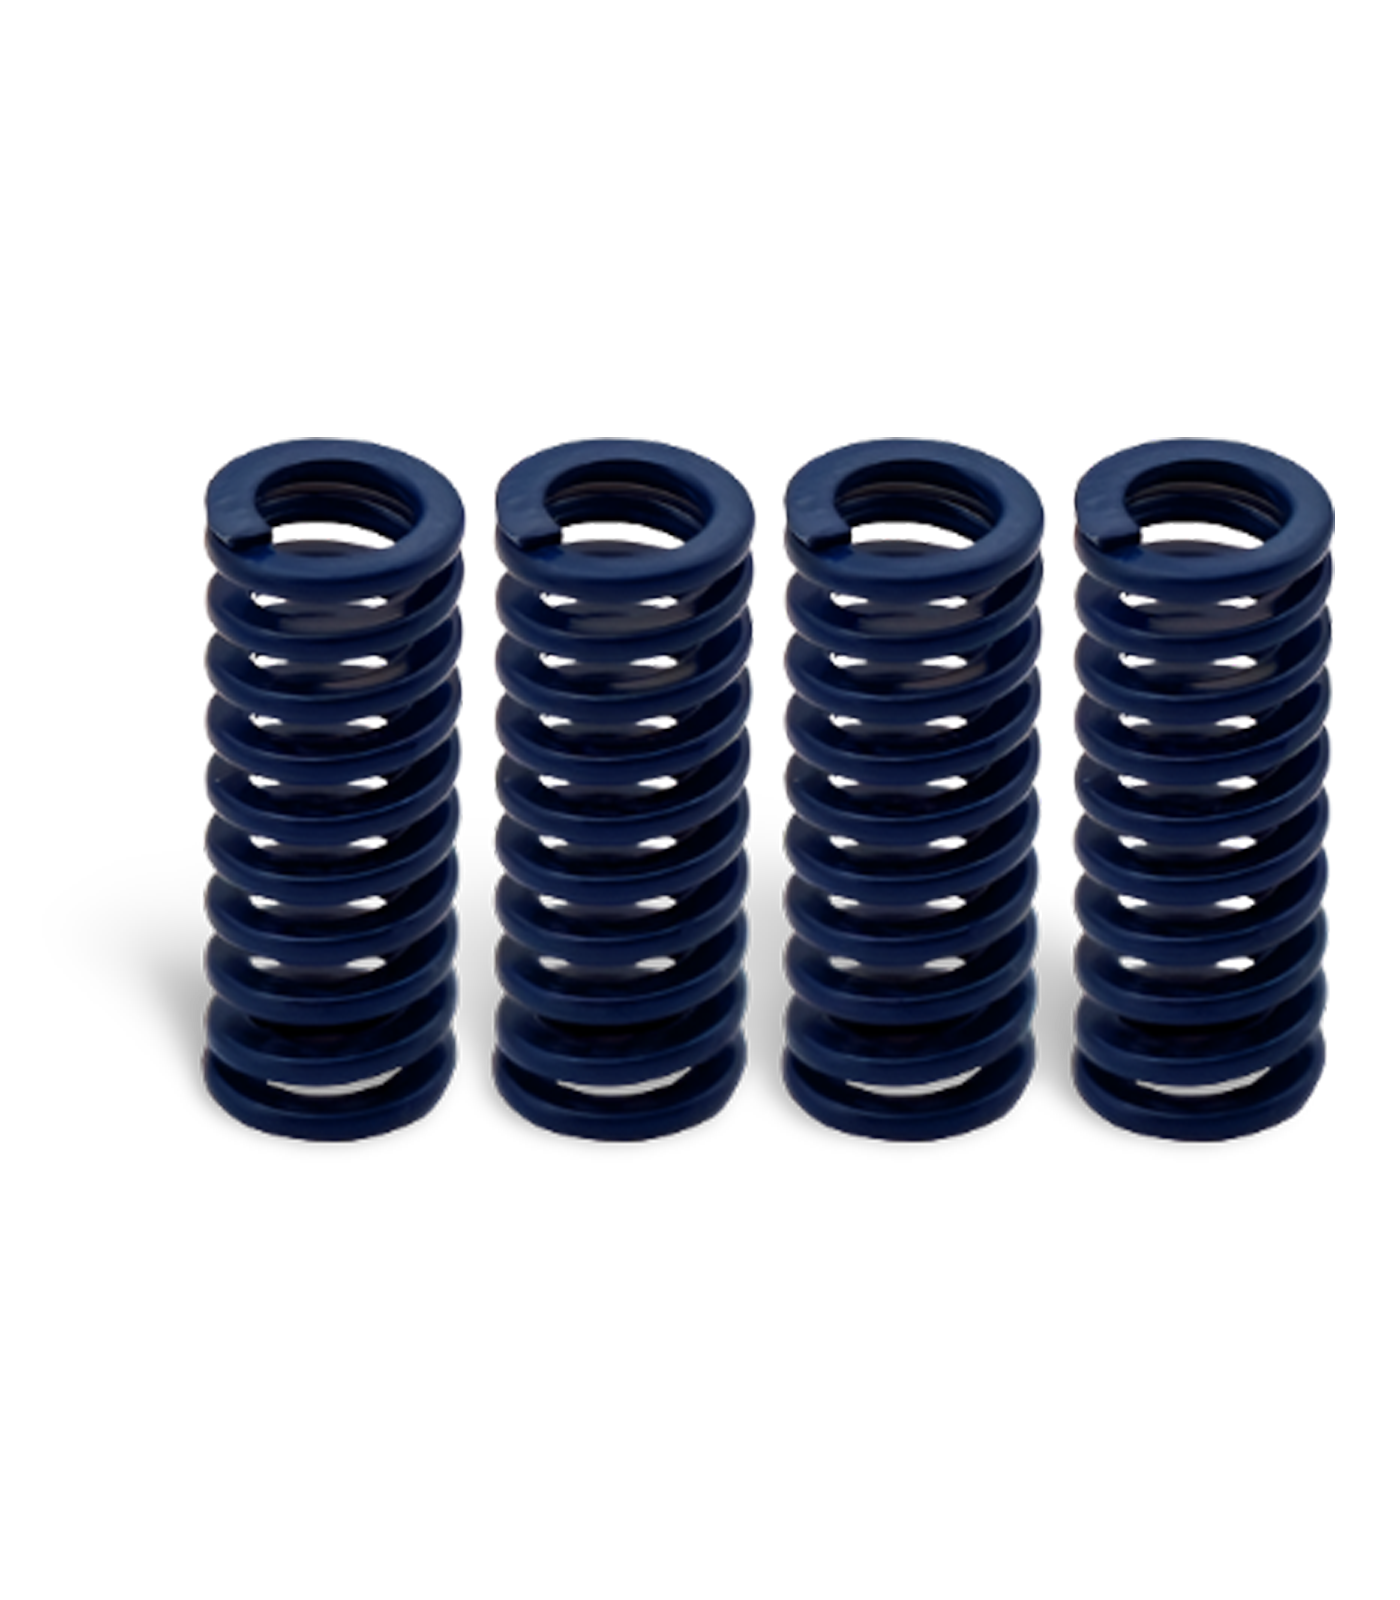 FDM 3D Printer Heated Bed Leveling Springs